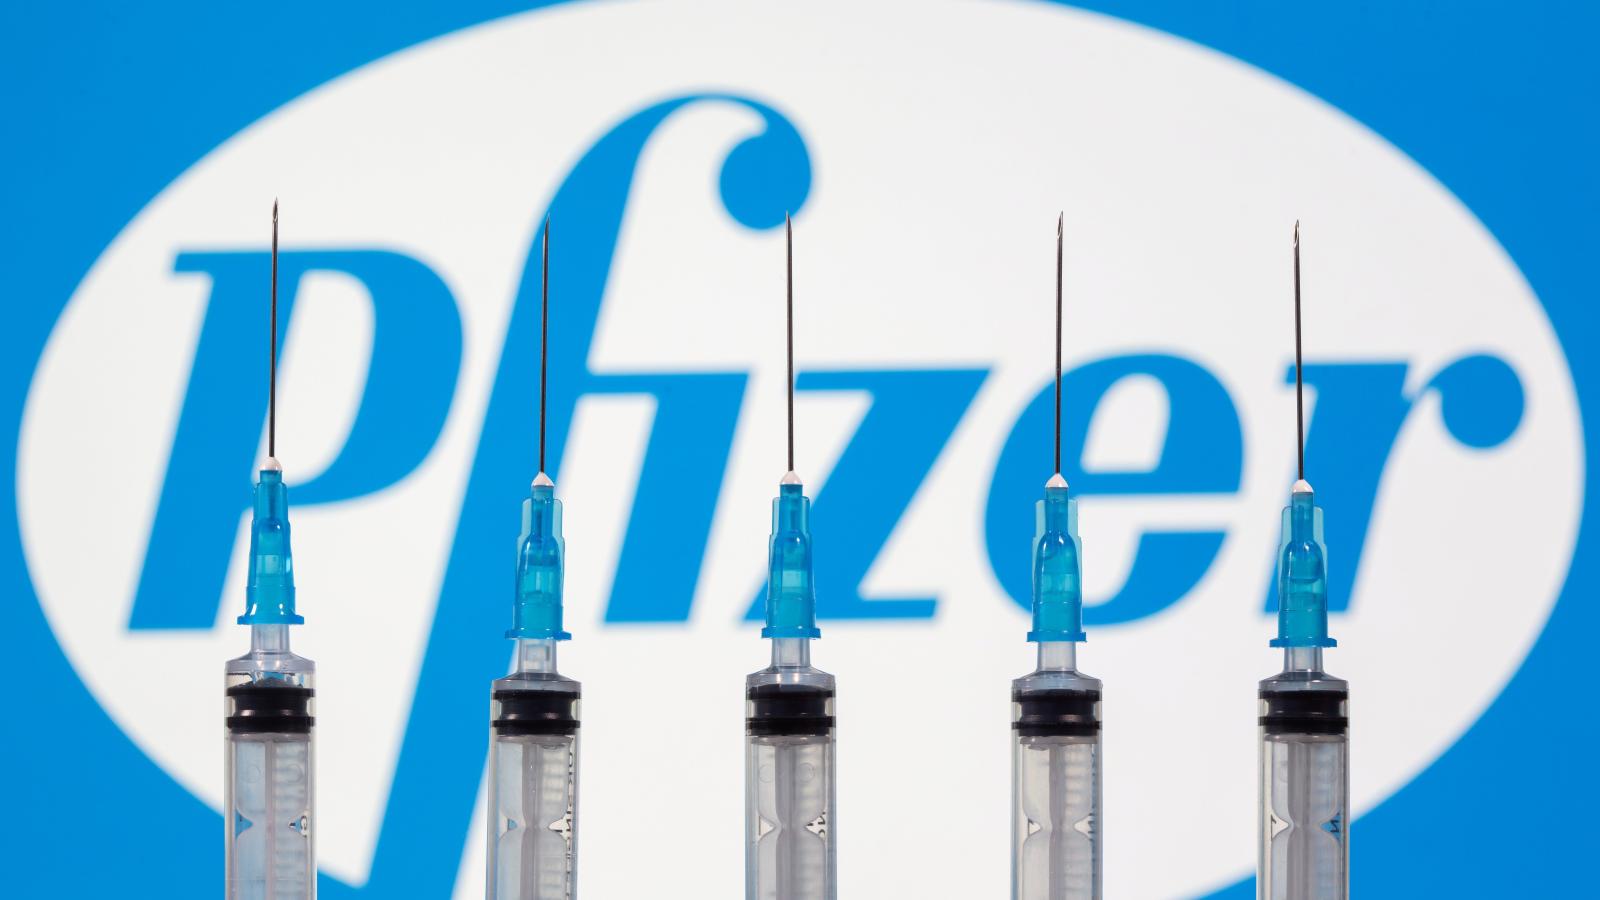 Tens of Millions of Brits Will Be Offered Pfizer Booster Vaccine This Autumn